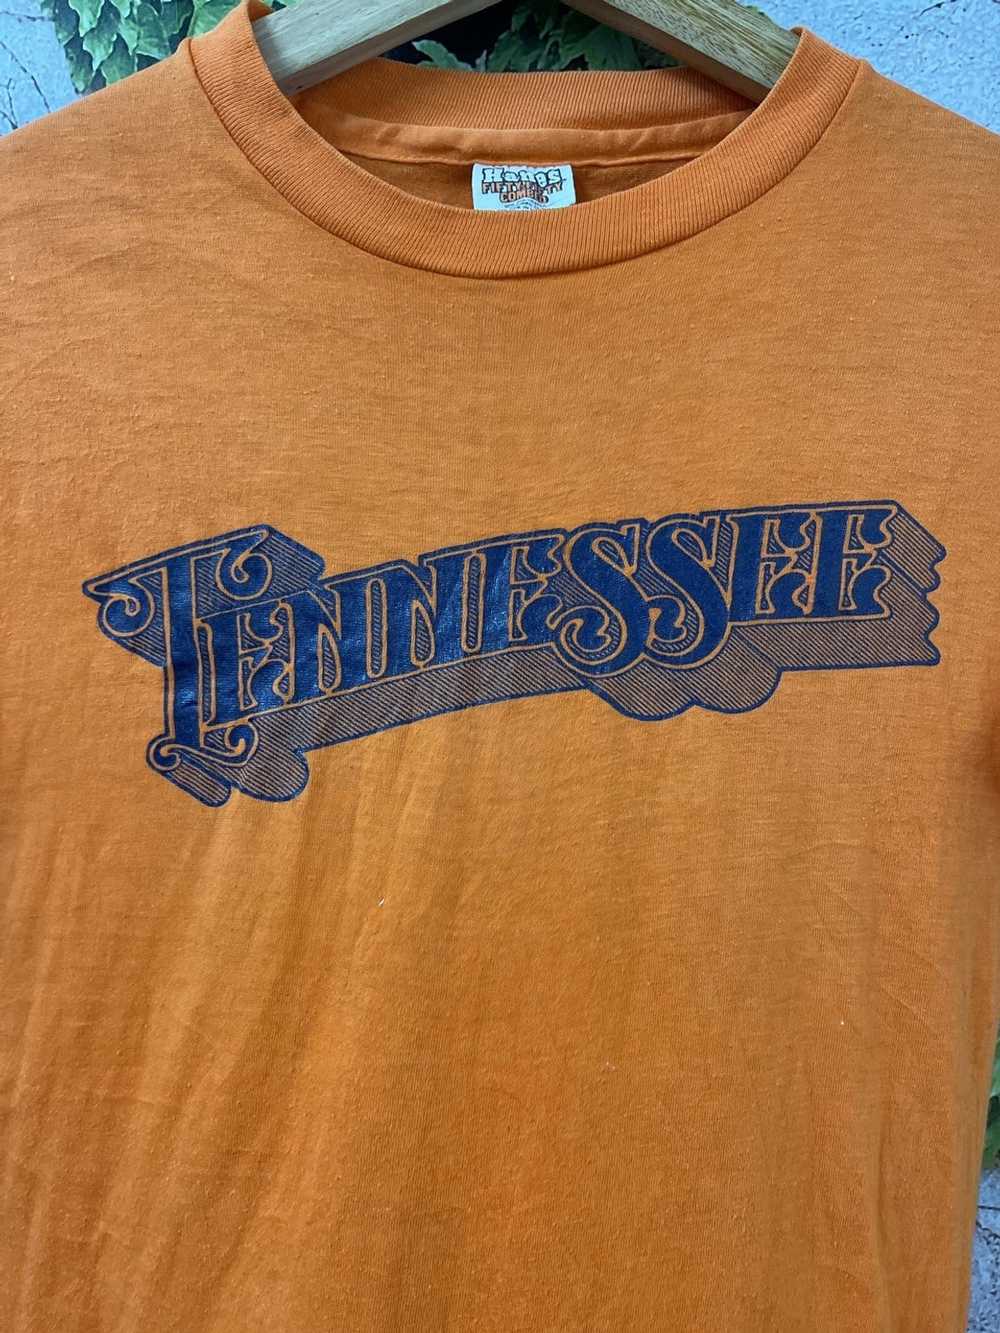 Tennessee Apparel Company × Tennessee Volunteers … - image 2